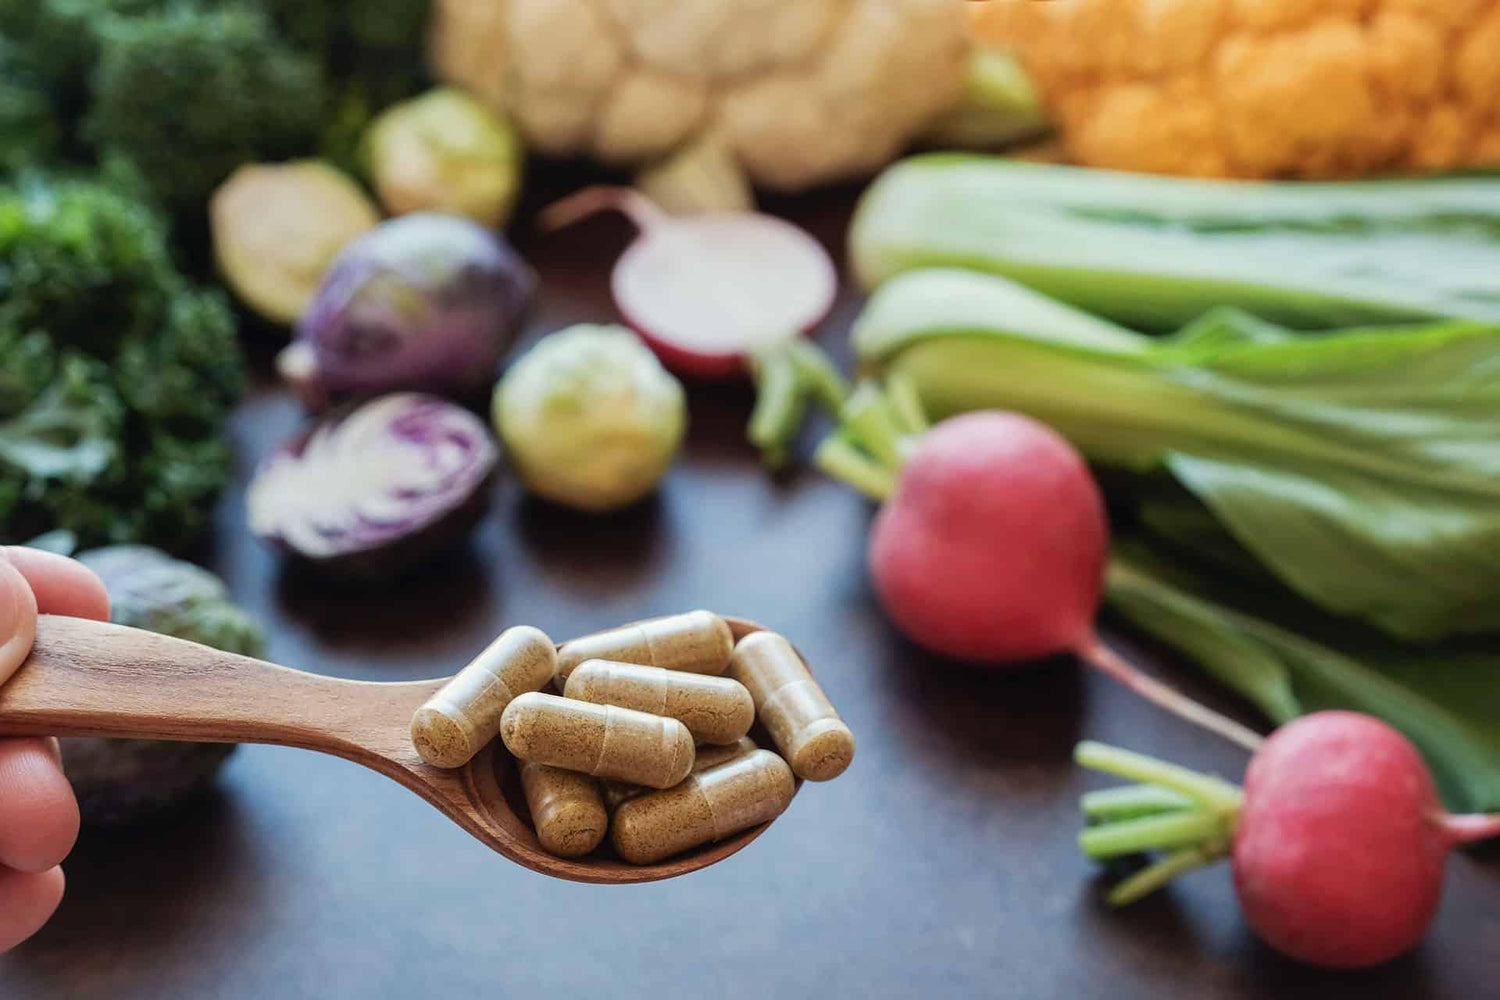 Closeup of herbal tablet supplements in wooden spoon with healthy veggies in the background